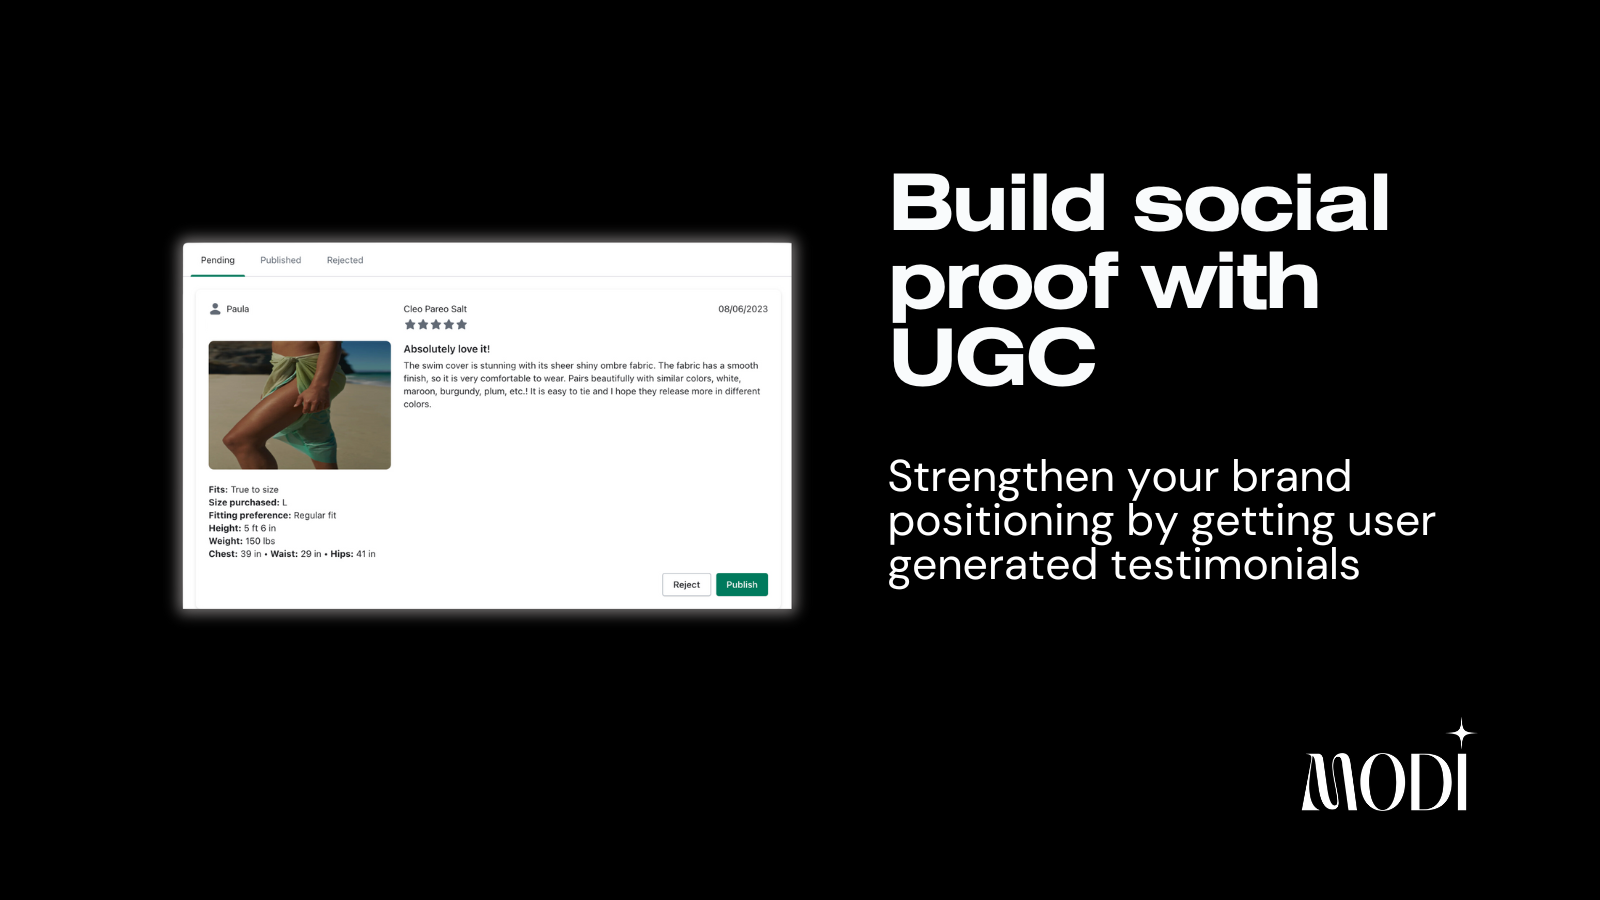 Build social proof with UGC